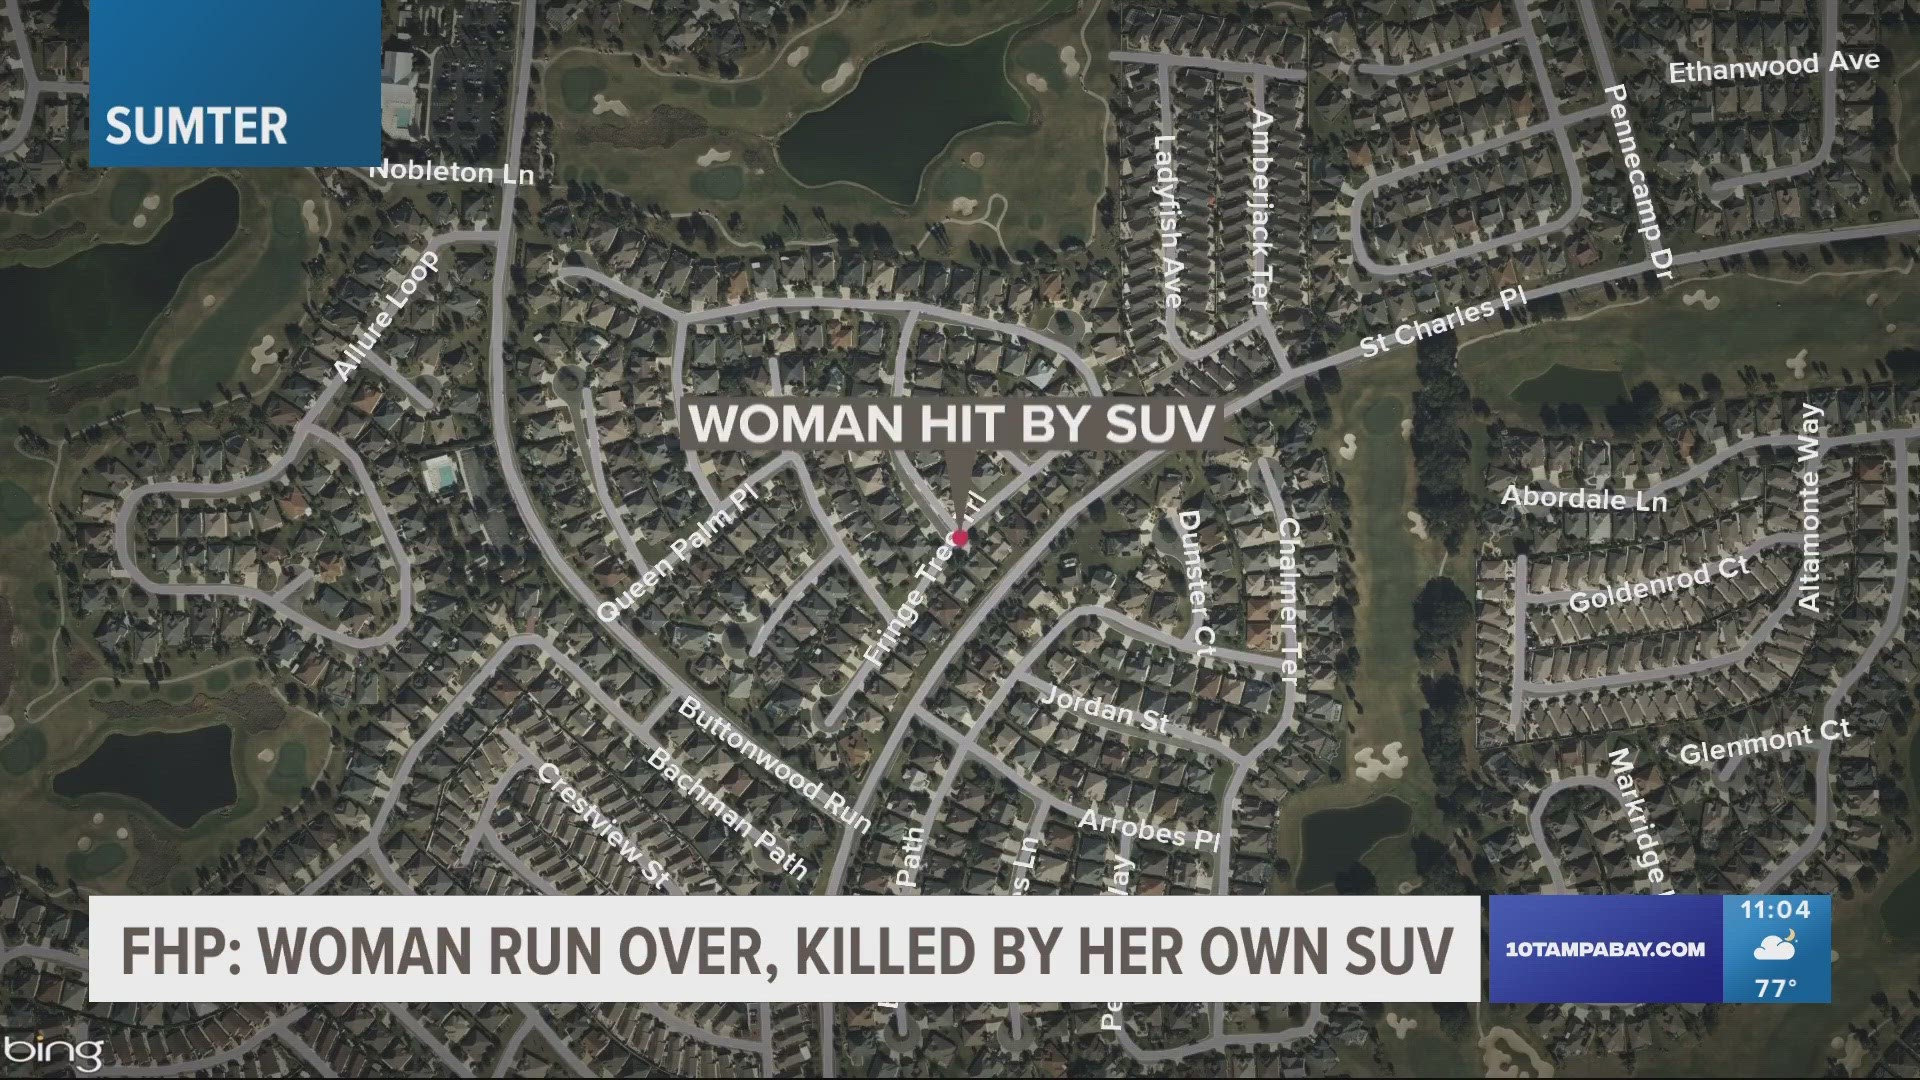 The woman was backing out of a driveway in The Villages and crashed into a parked SUV on the opposite side of the road, officials say.